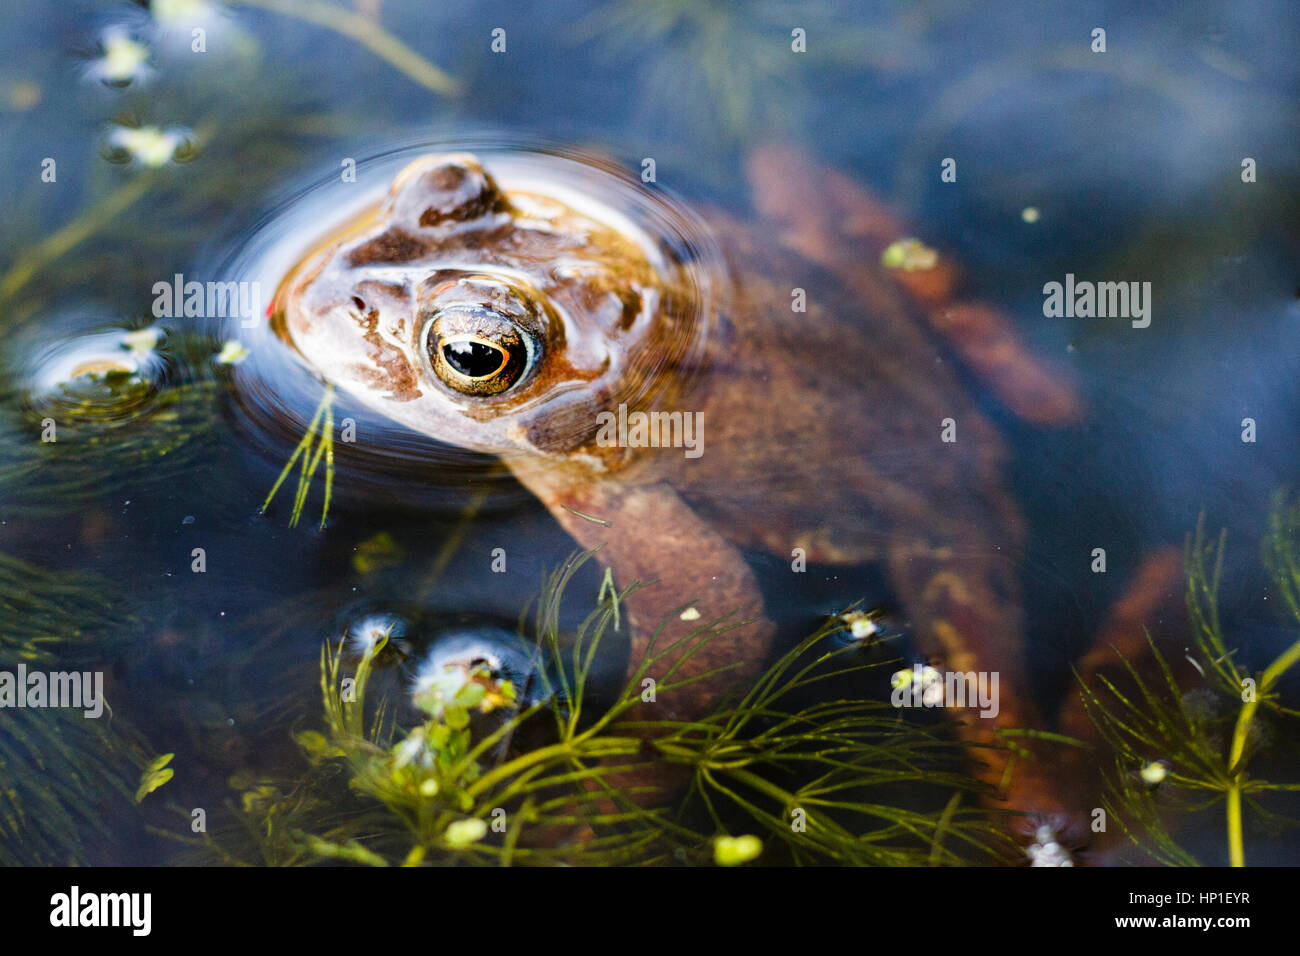 17th Feb, 2017. UK weather. As the temperature in the UK continues to rise, amphibians start to come out of hibernation. A Common frog (Rana temporaria) pokes its head above the water in a garden pond in  East Sussex, UK. Credit: Ed Brown/Alamy Live News Stock Photo